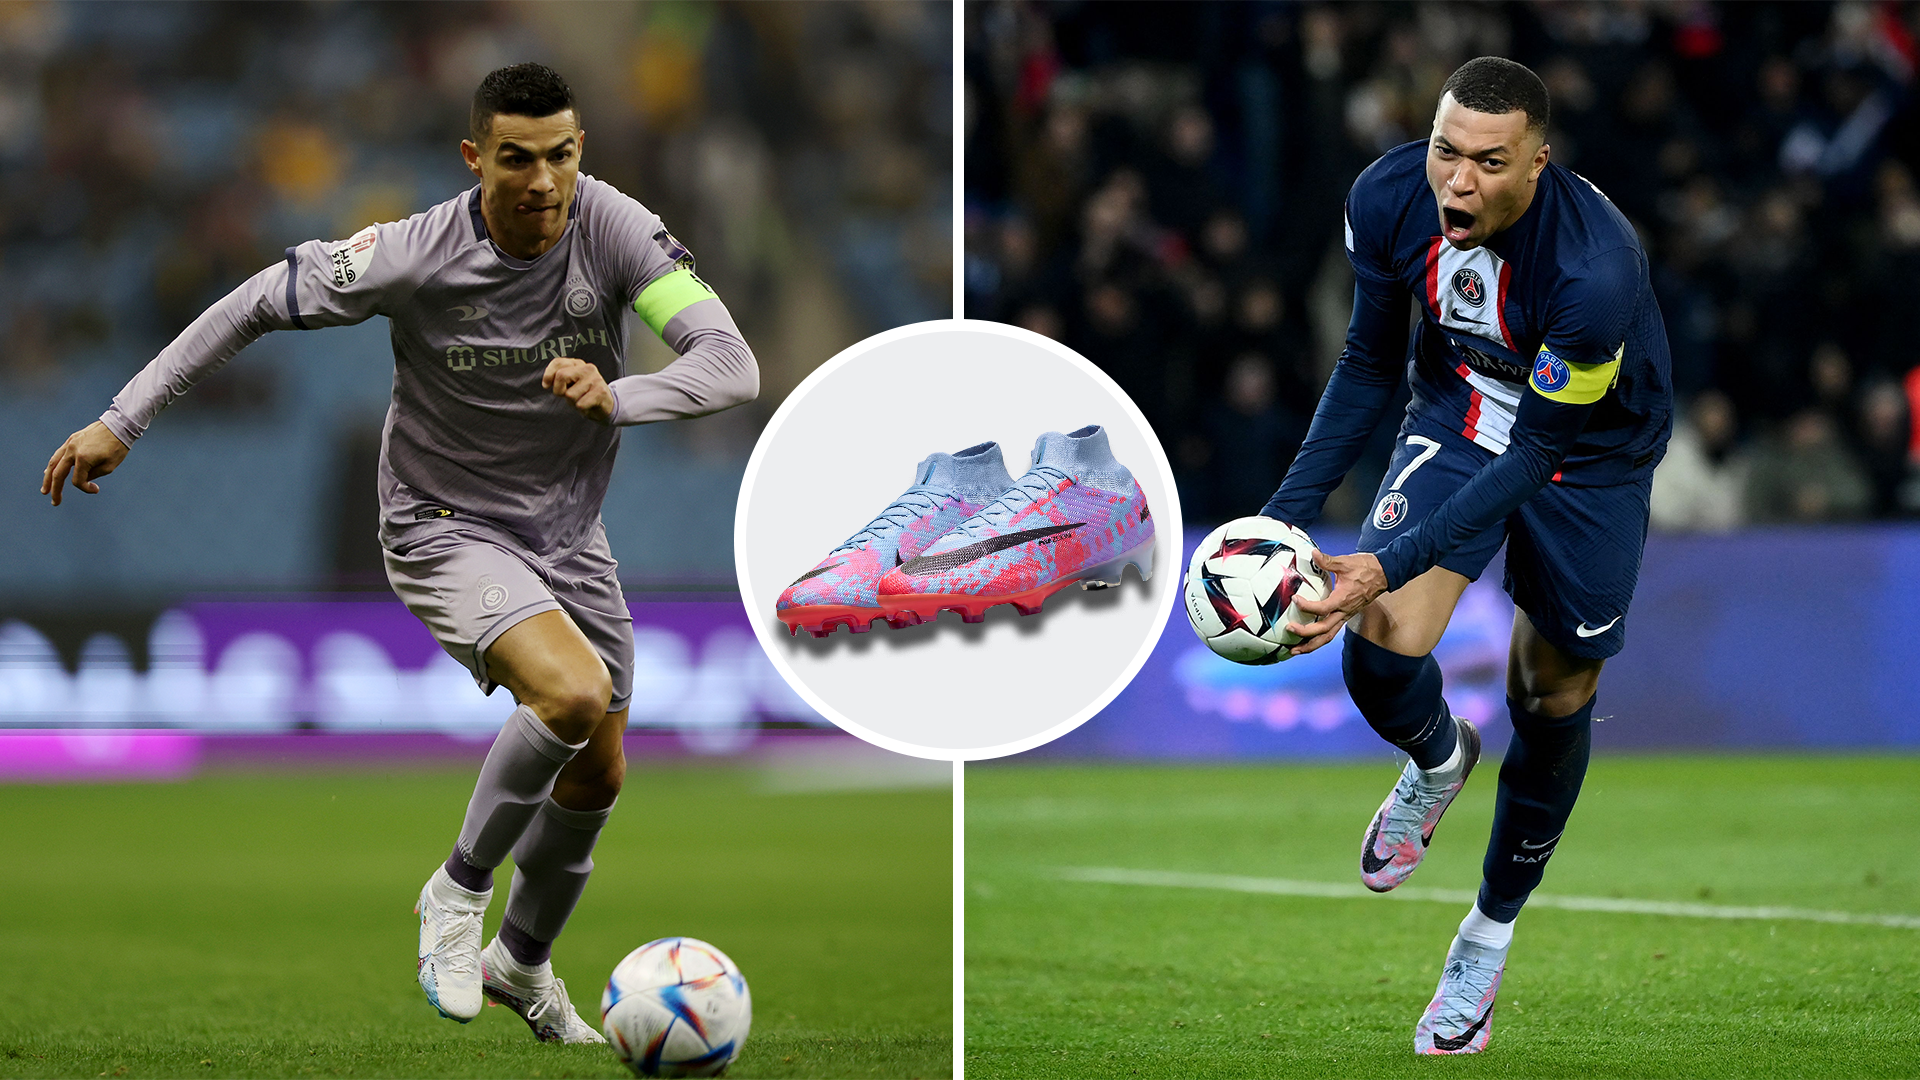 What soccer cleats do Messi, Ronaldo and Haaland wear?